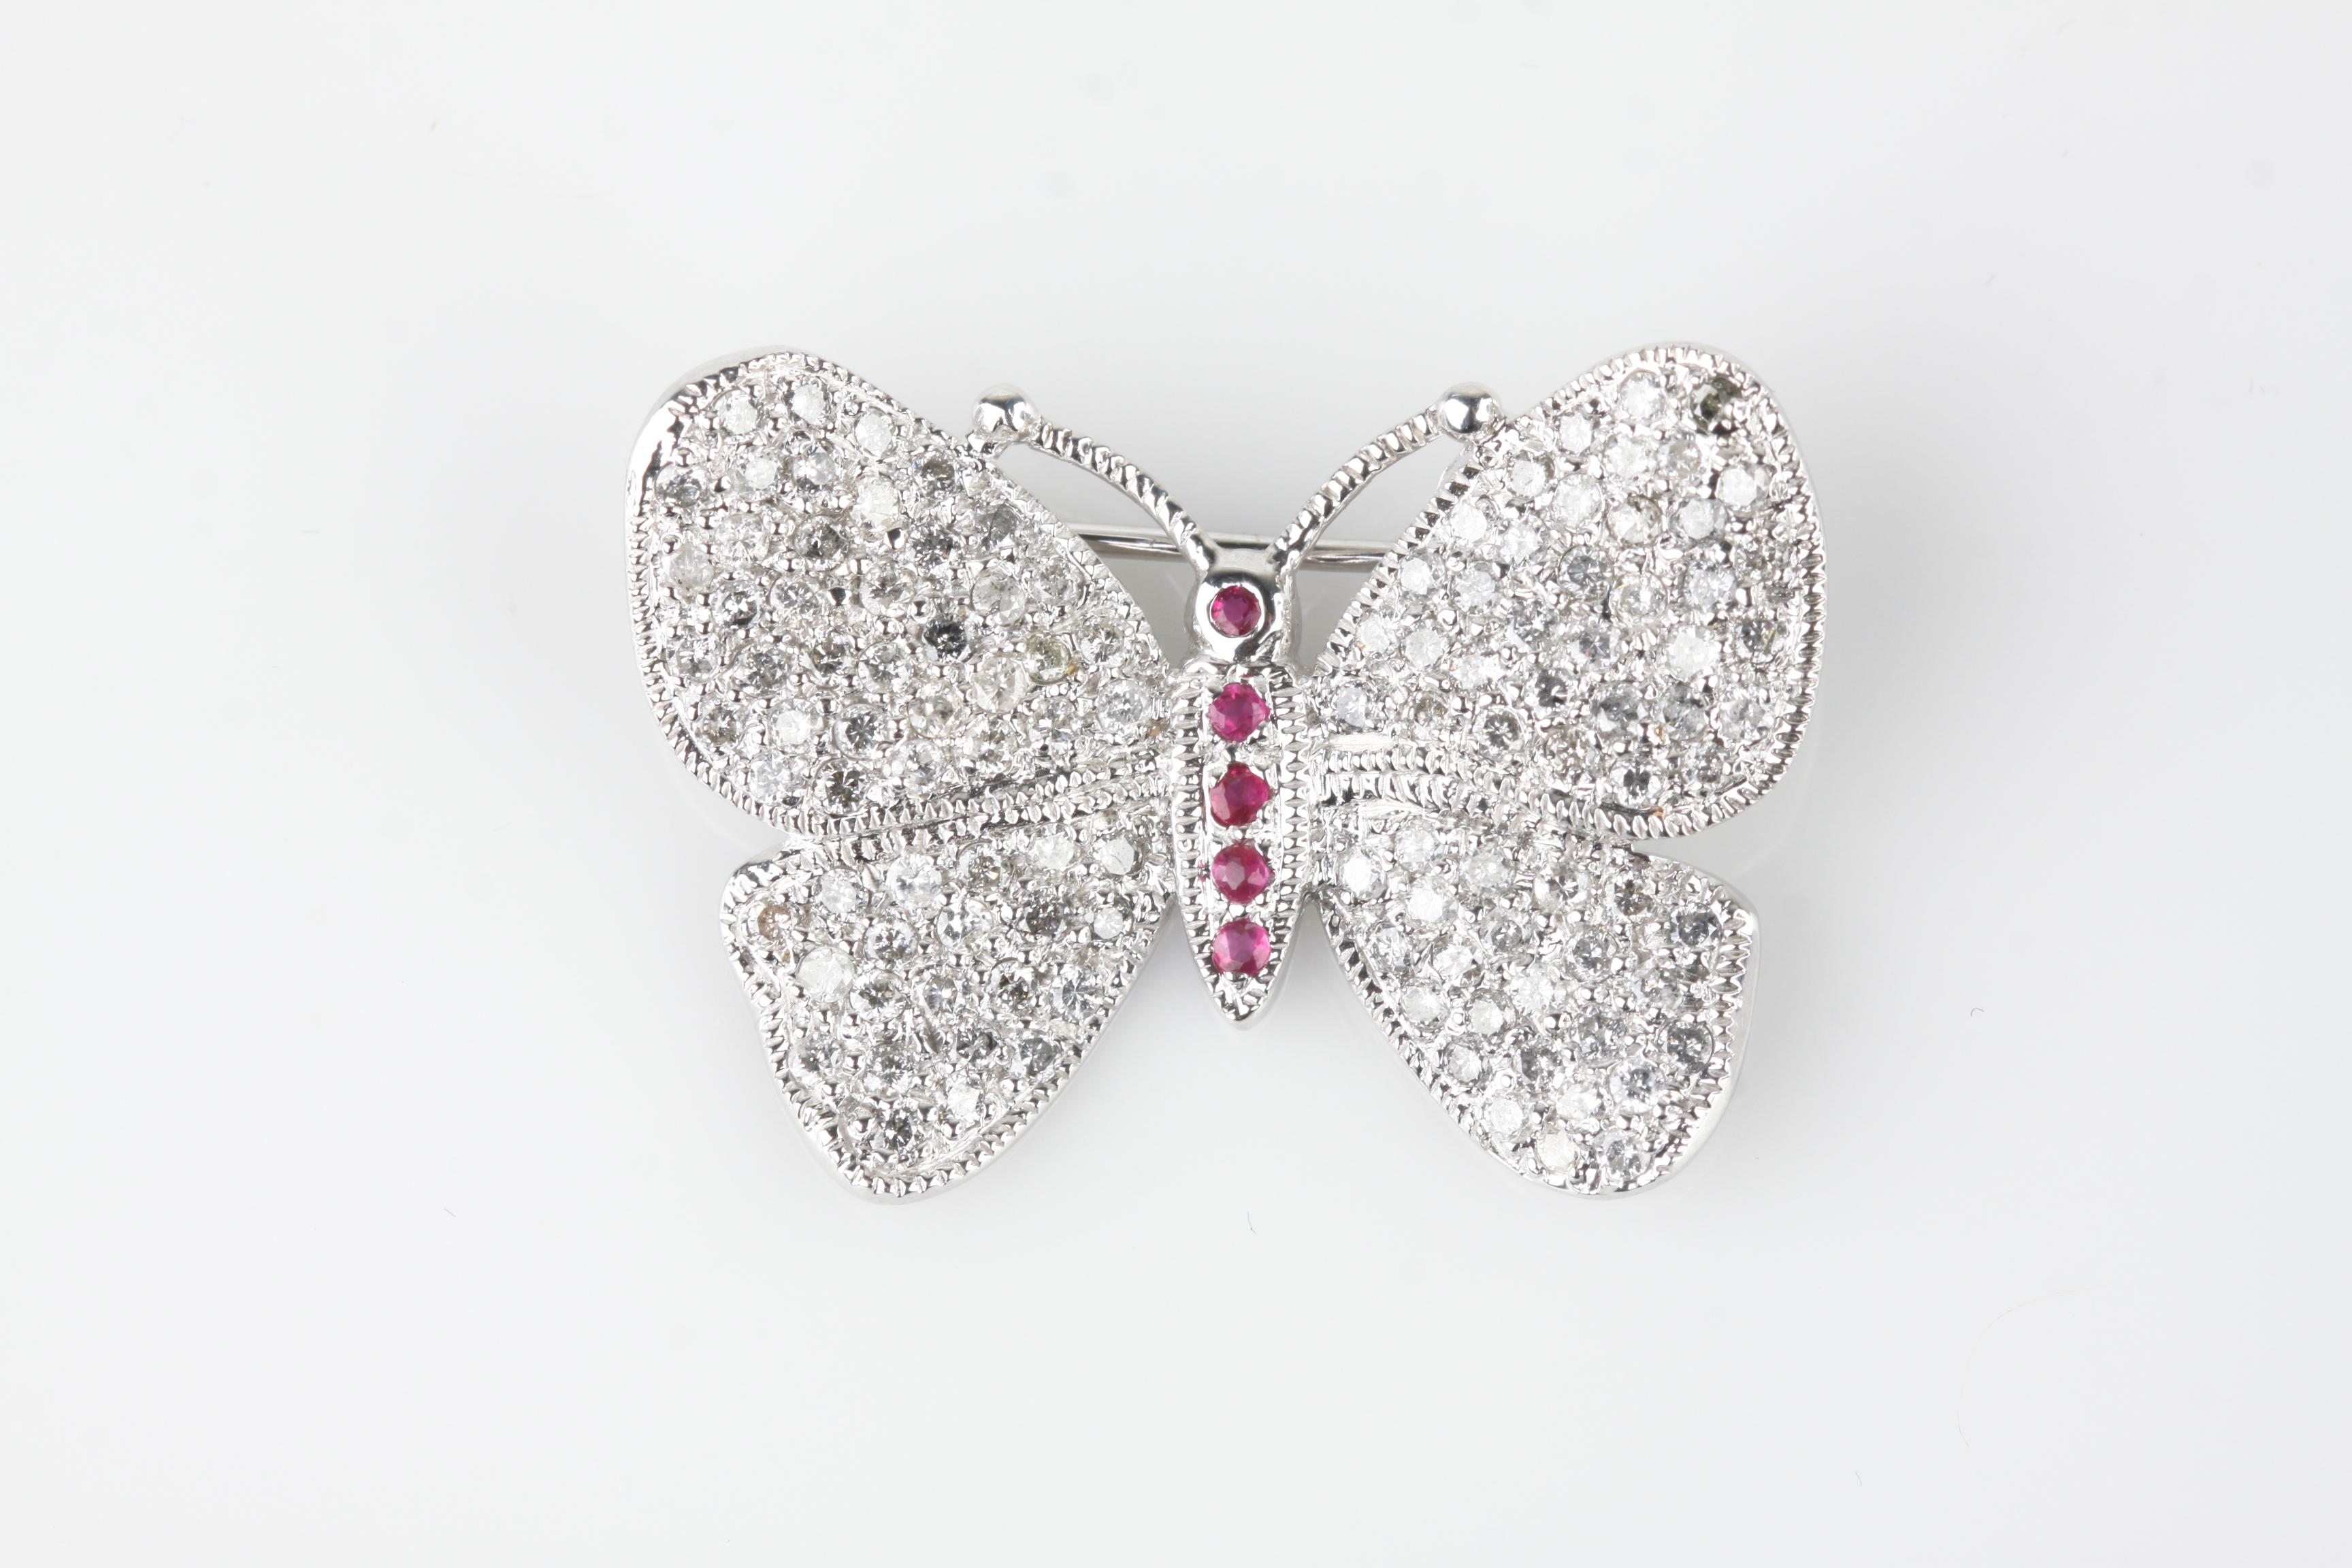 Gorgeous Unique White Gold Butterfly Brooch
Features Pave Set Diamonds in Wing and Ruby Accents on Body
Total Diamond Weight = 1.87 ct
Average Color = G - I
Length of Brooch = 34 mm
Length of Body = 13 mm
Total Mass = 6.92 grams